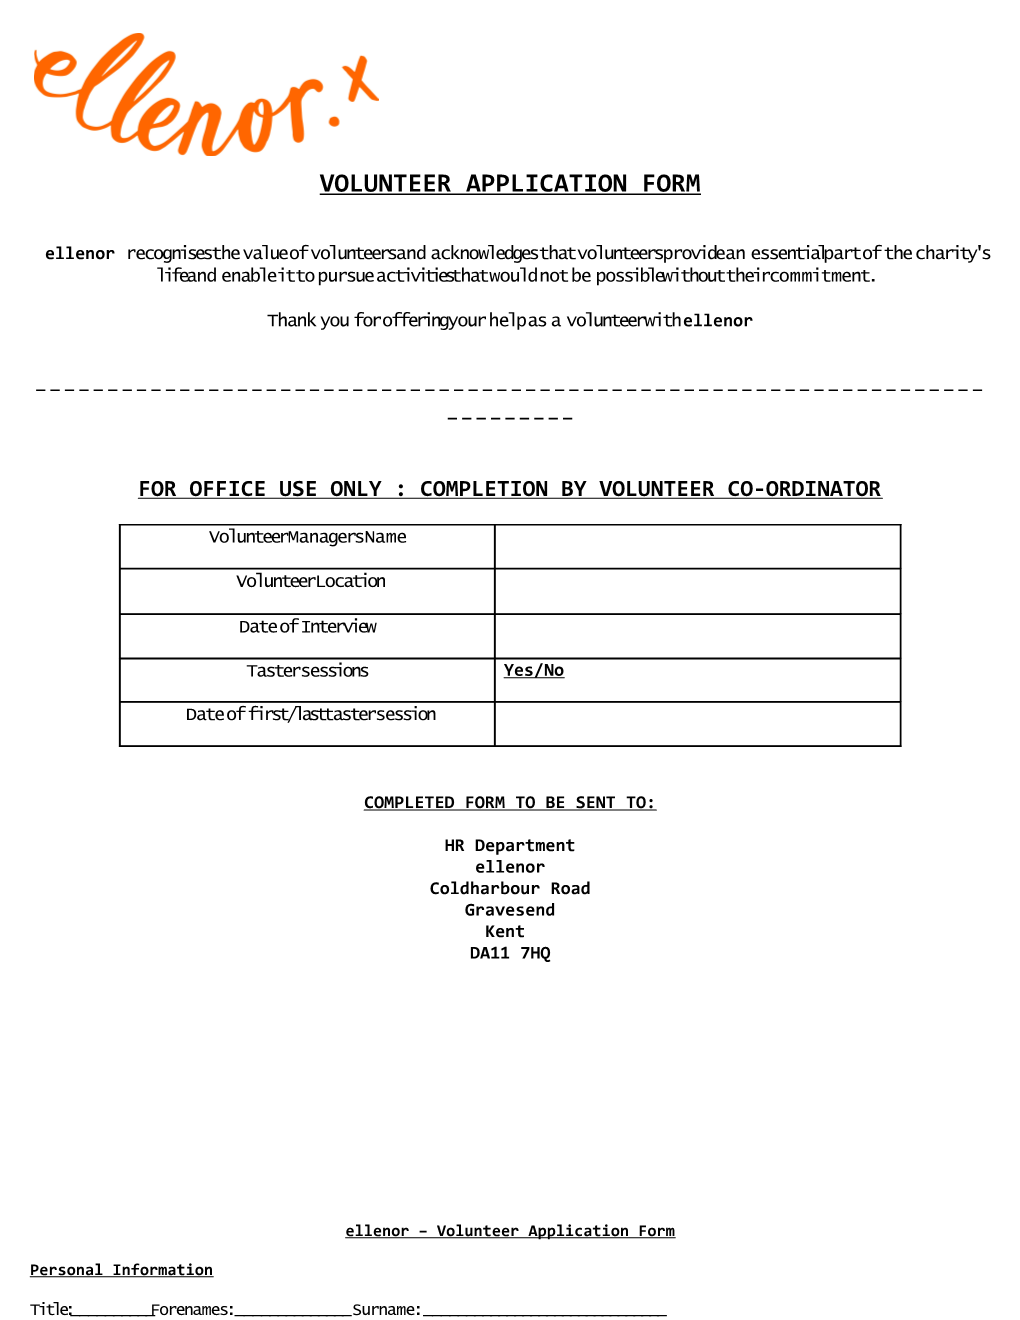 For Office Use Only : Completion by Volunteer Co-Ordinator